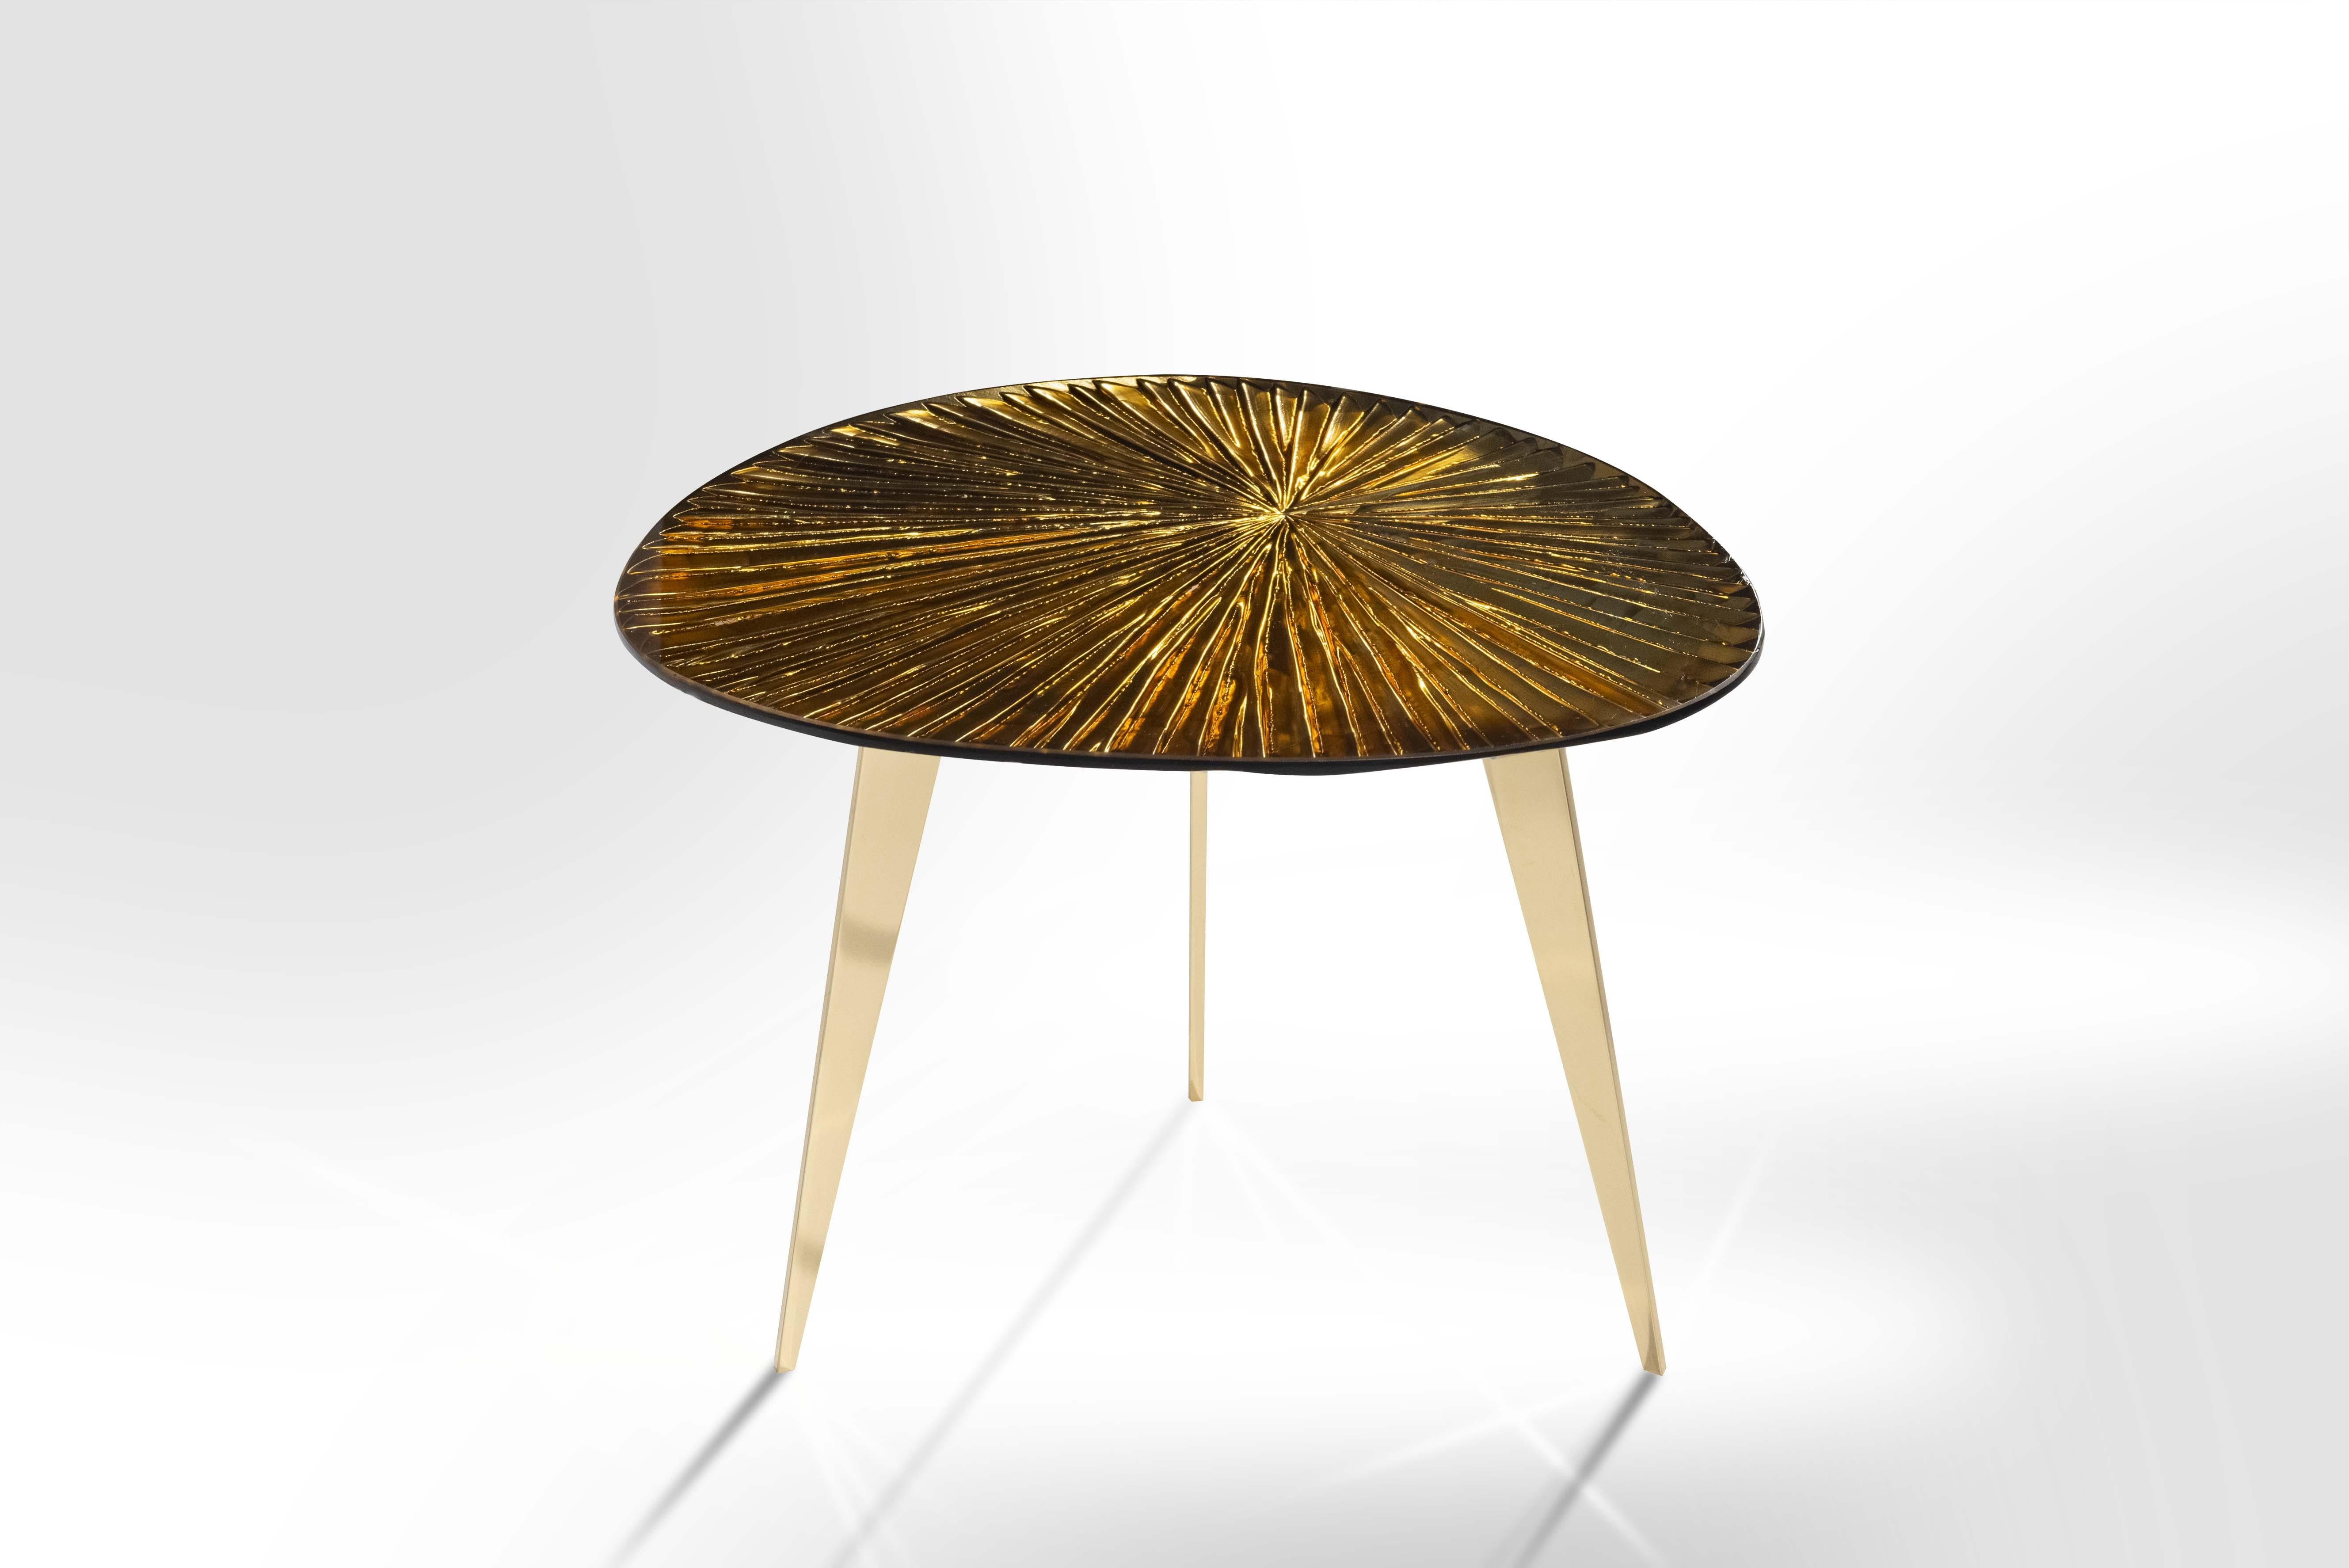 
The 'Ambra' coffee table is the solution for elegant and refined furnishings, with warm and seductive tones. The entire support structure is made with brass. The legs have a polished brass finish while the underplate is matt black.
The crystal top